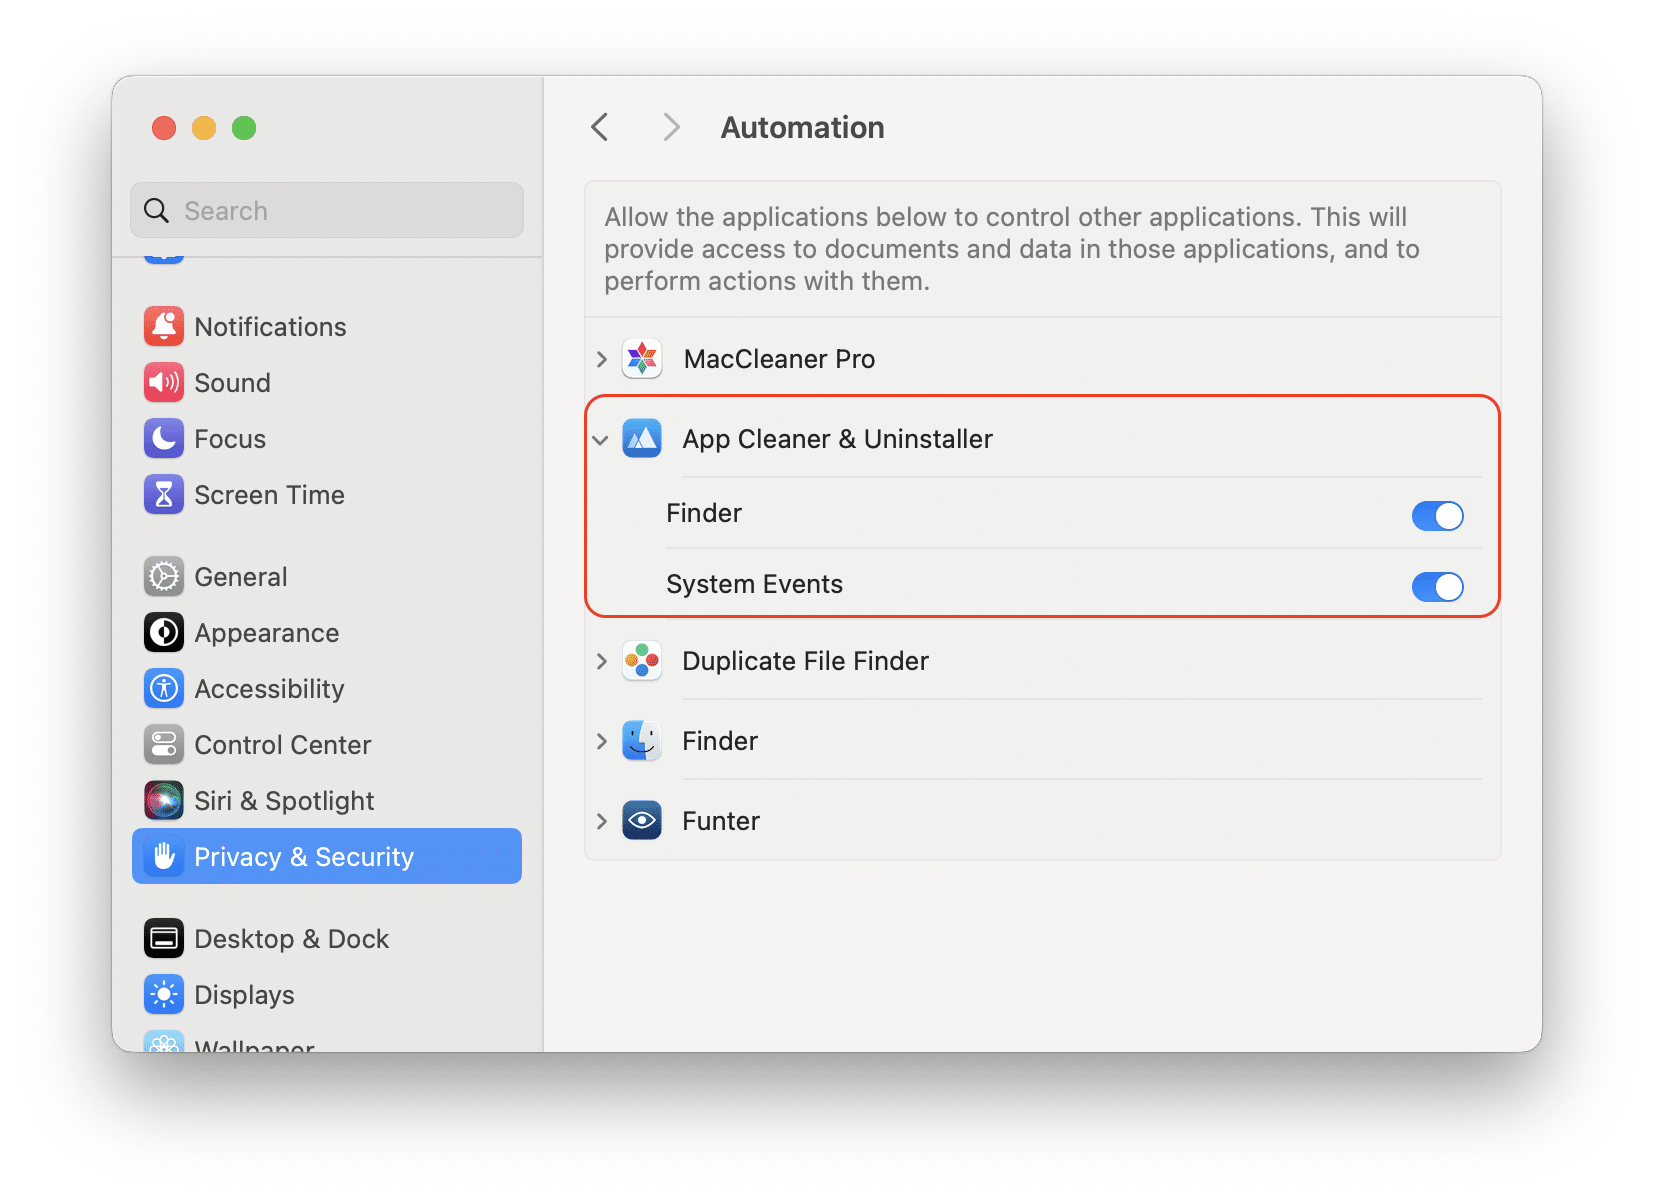 System Settings showing App Cleaner Uninstaller in the automation option